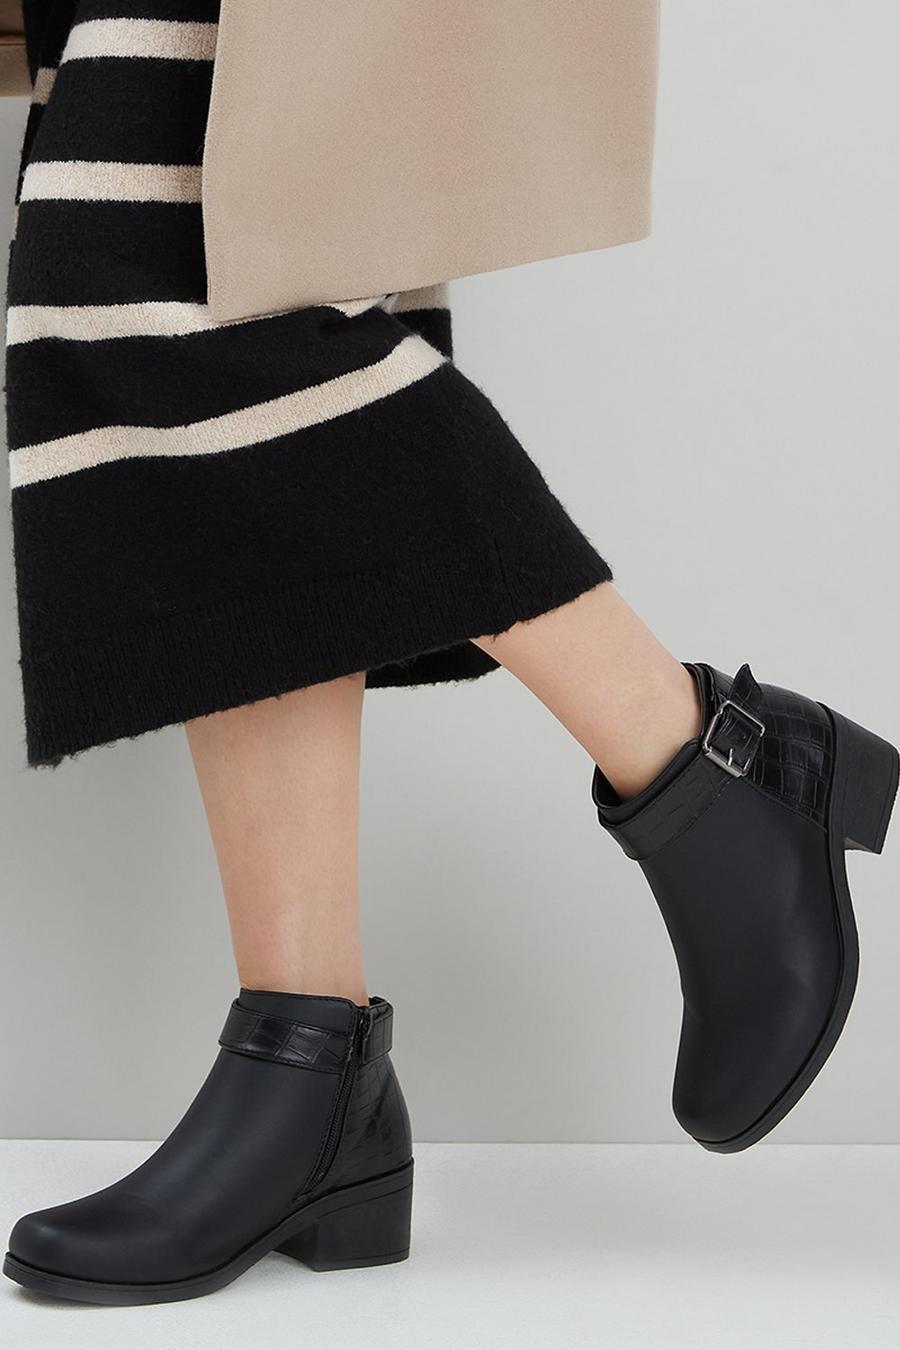 Alora Buckle Strap Ankle Boot